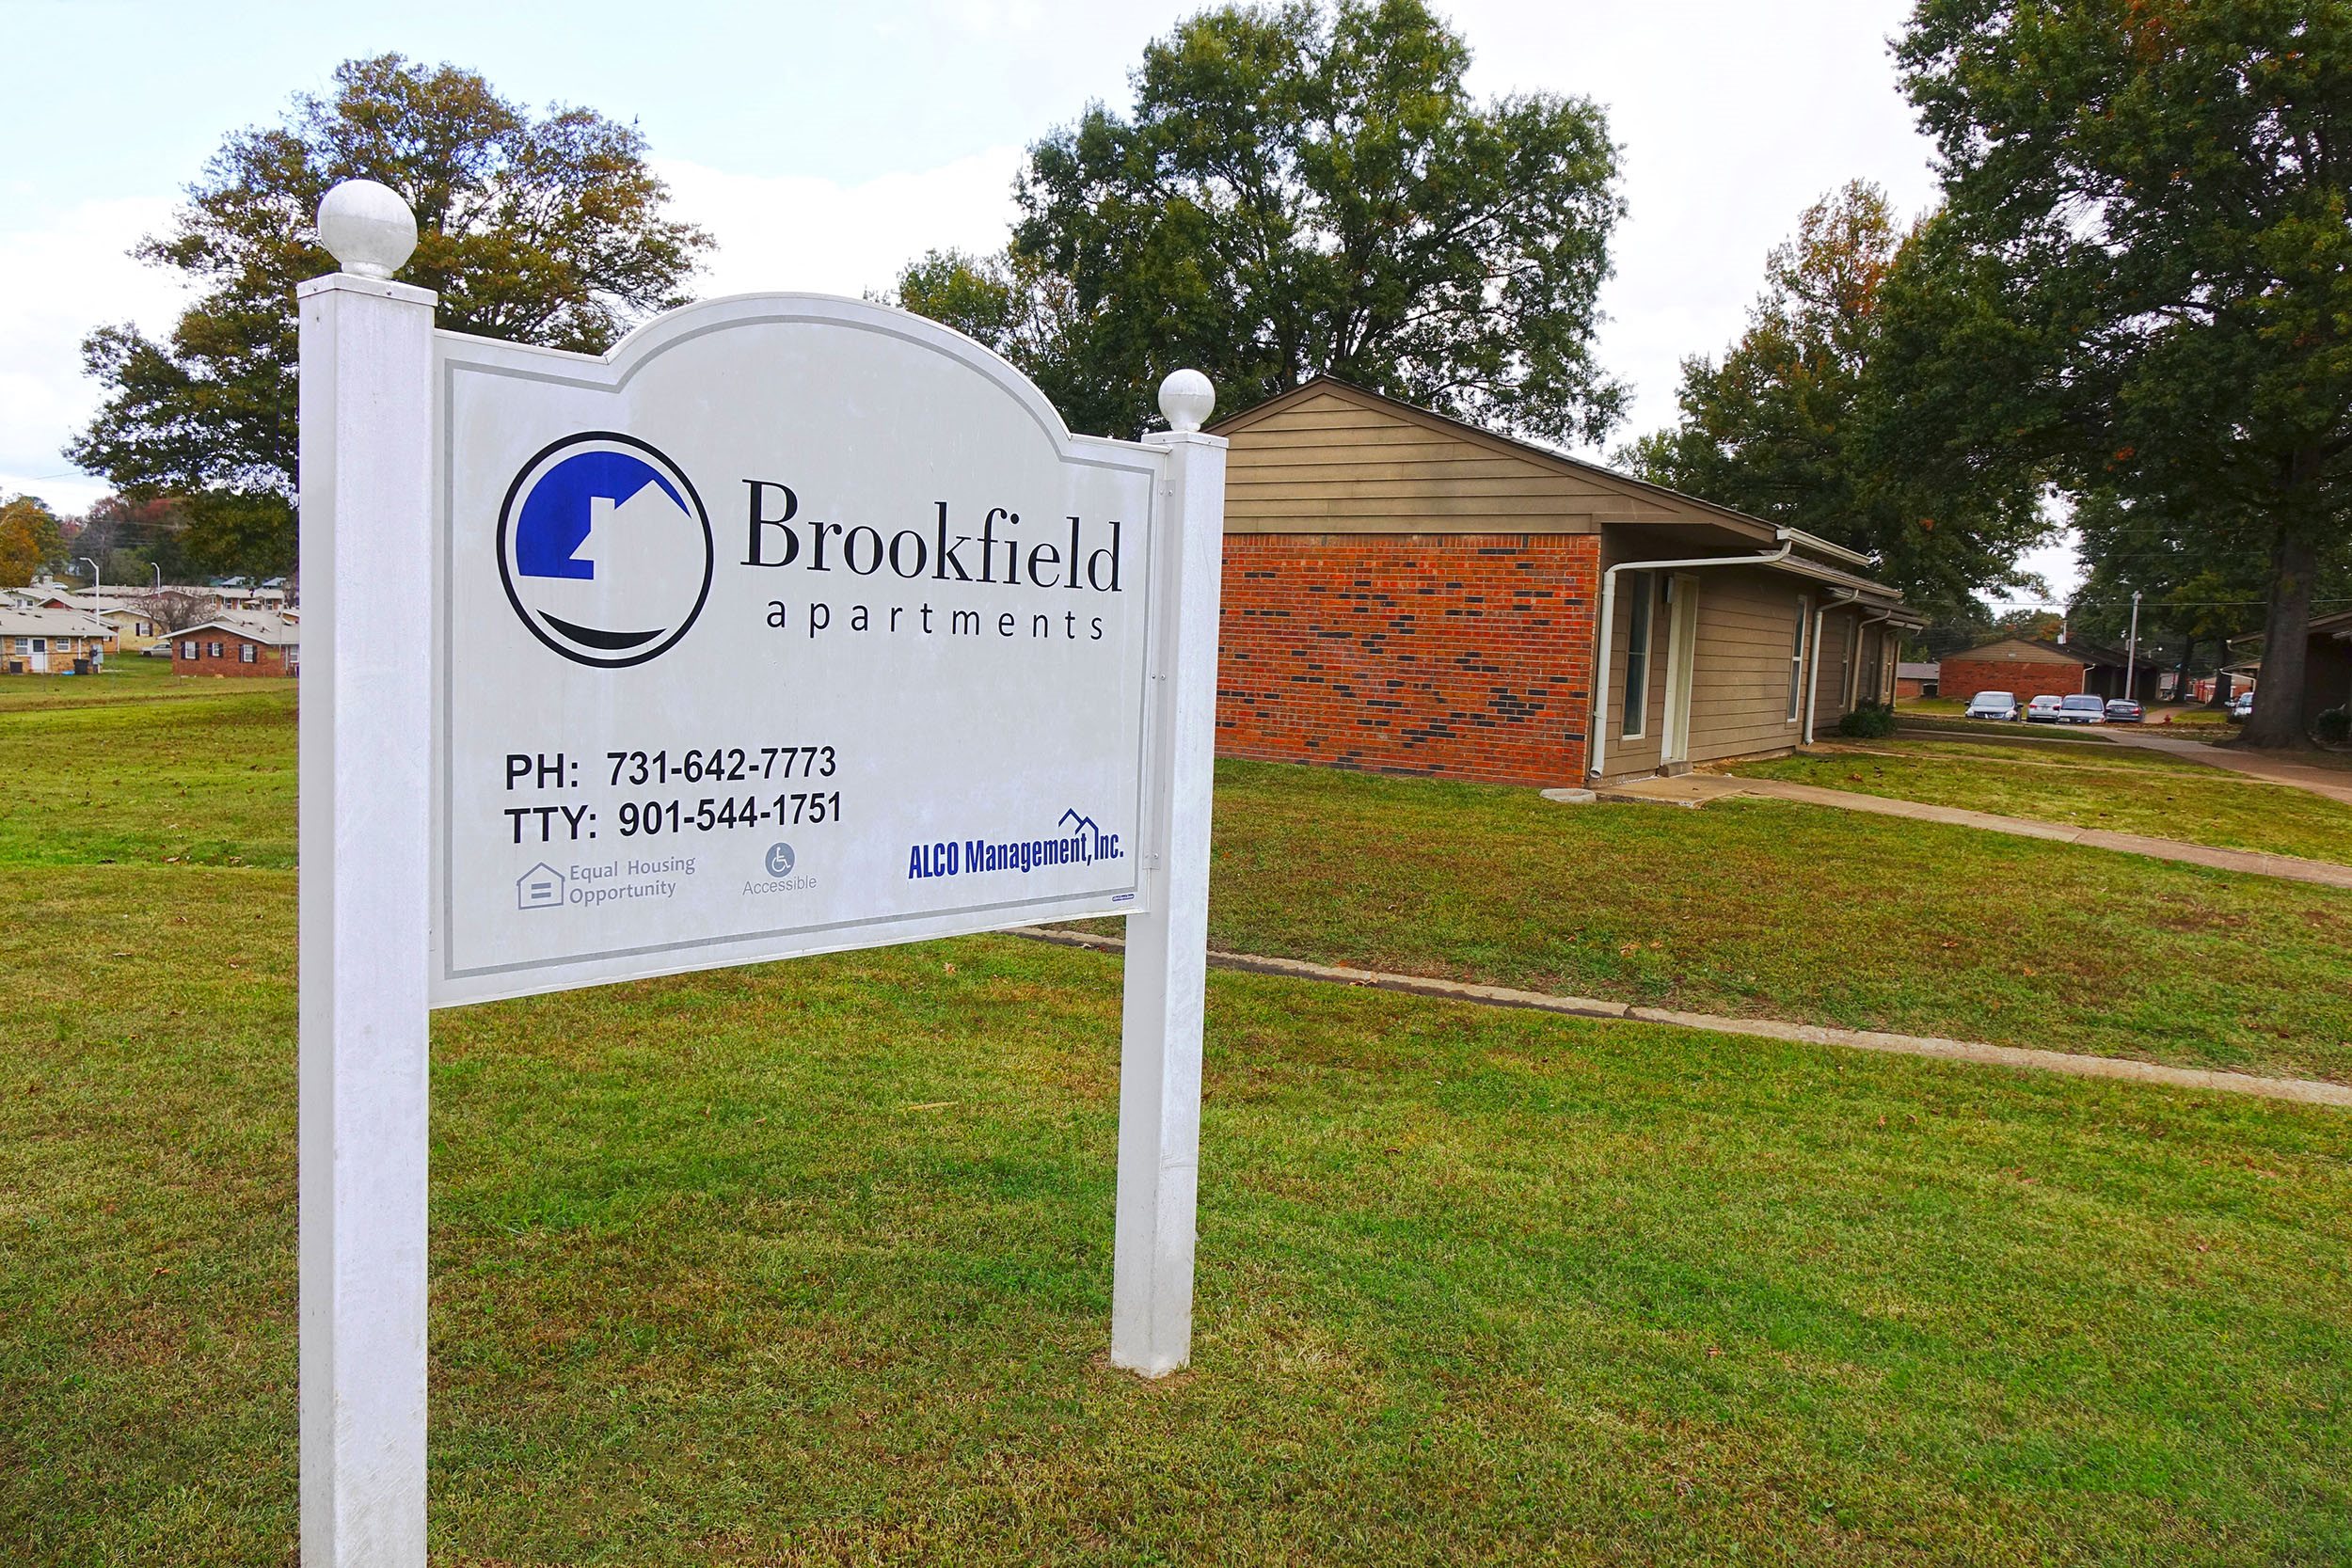 Photos and Video of Brookfield Apartments in Paris, TN